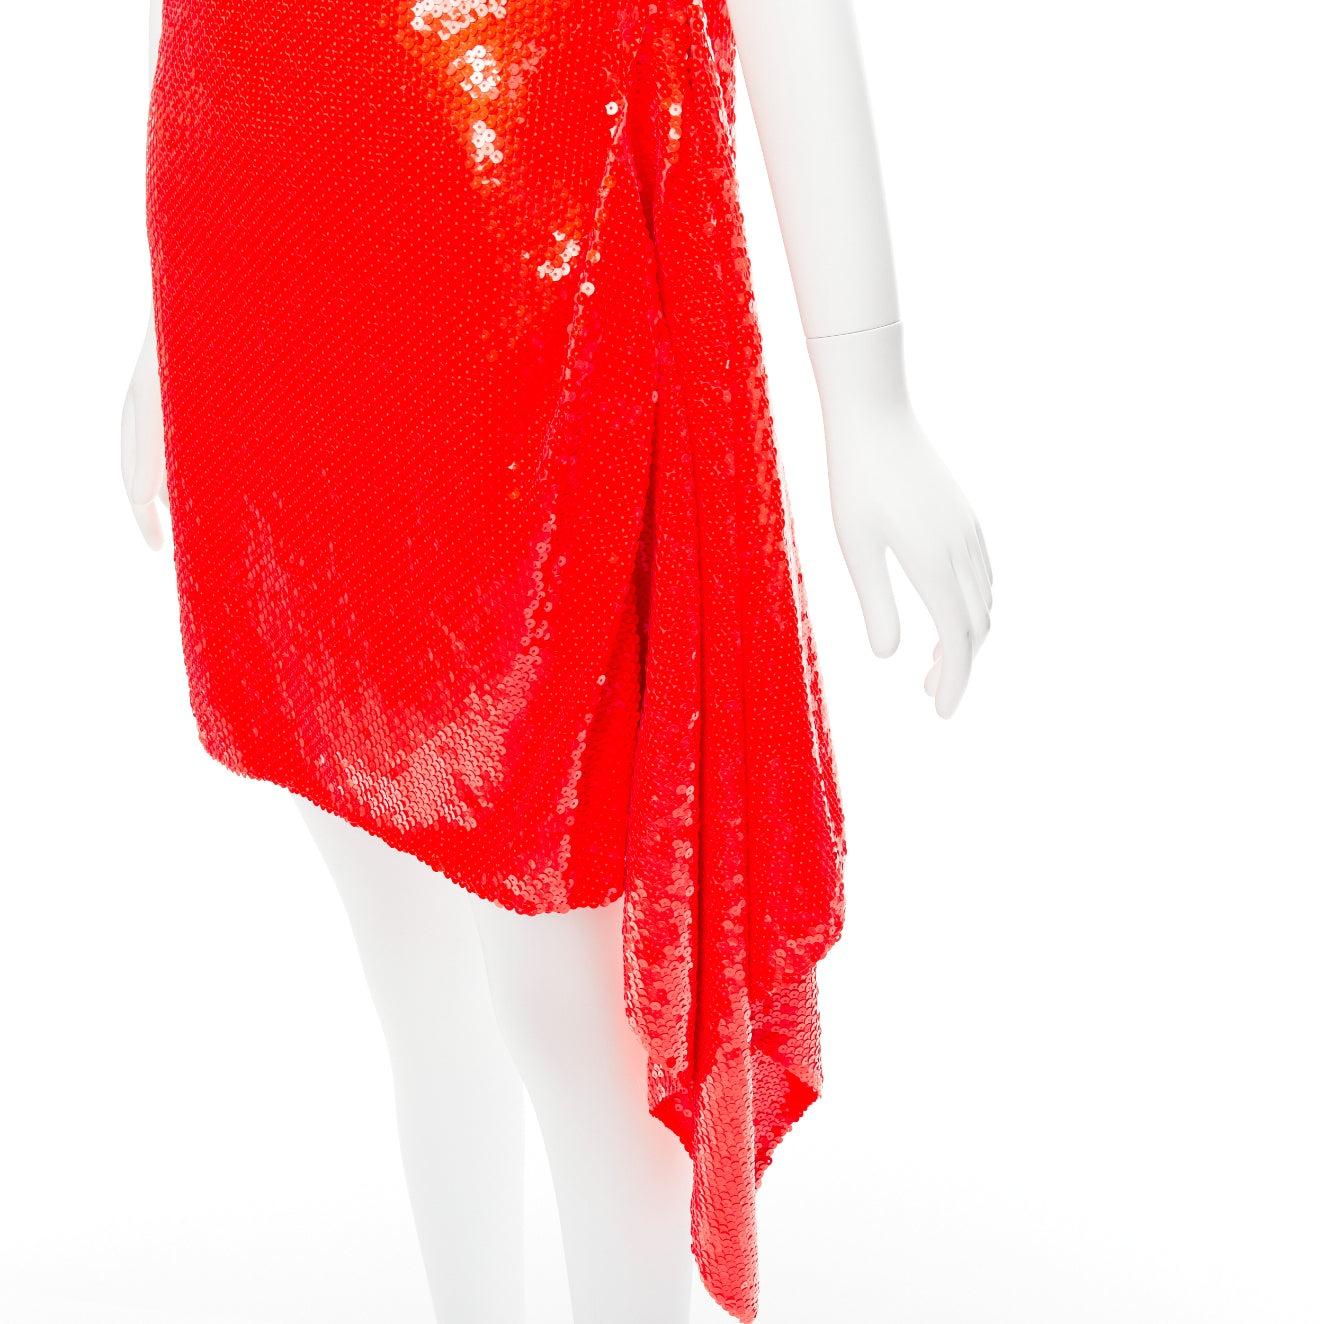 CALVIN KLEIN 205W39NYC Raf Simons red sequins draped hem dress US4 S
Reference: NKLL/A00028
Brand: Calvin Klein
Designer: Raf Simons
Collection: 205W39NYC
Material: Polyester, Blend
Color: Red
Pattern: Sequins
Closure: Zip
Lining: Red Silk
Extra